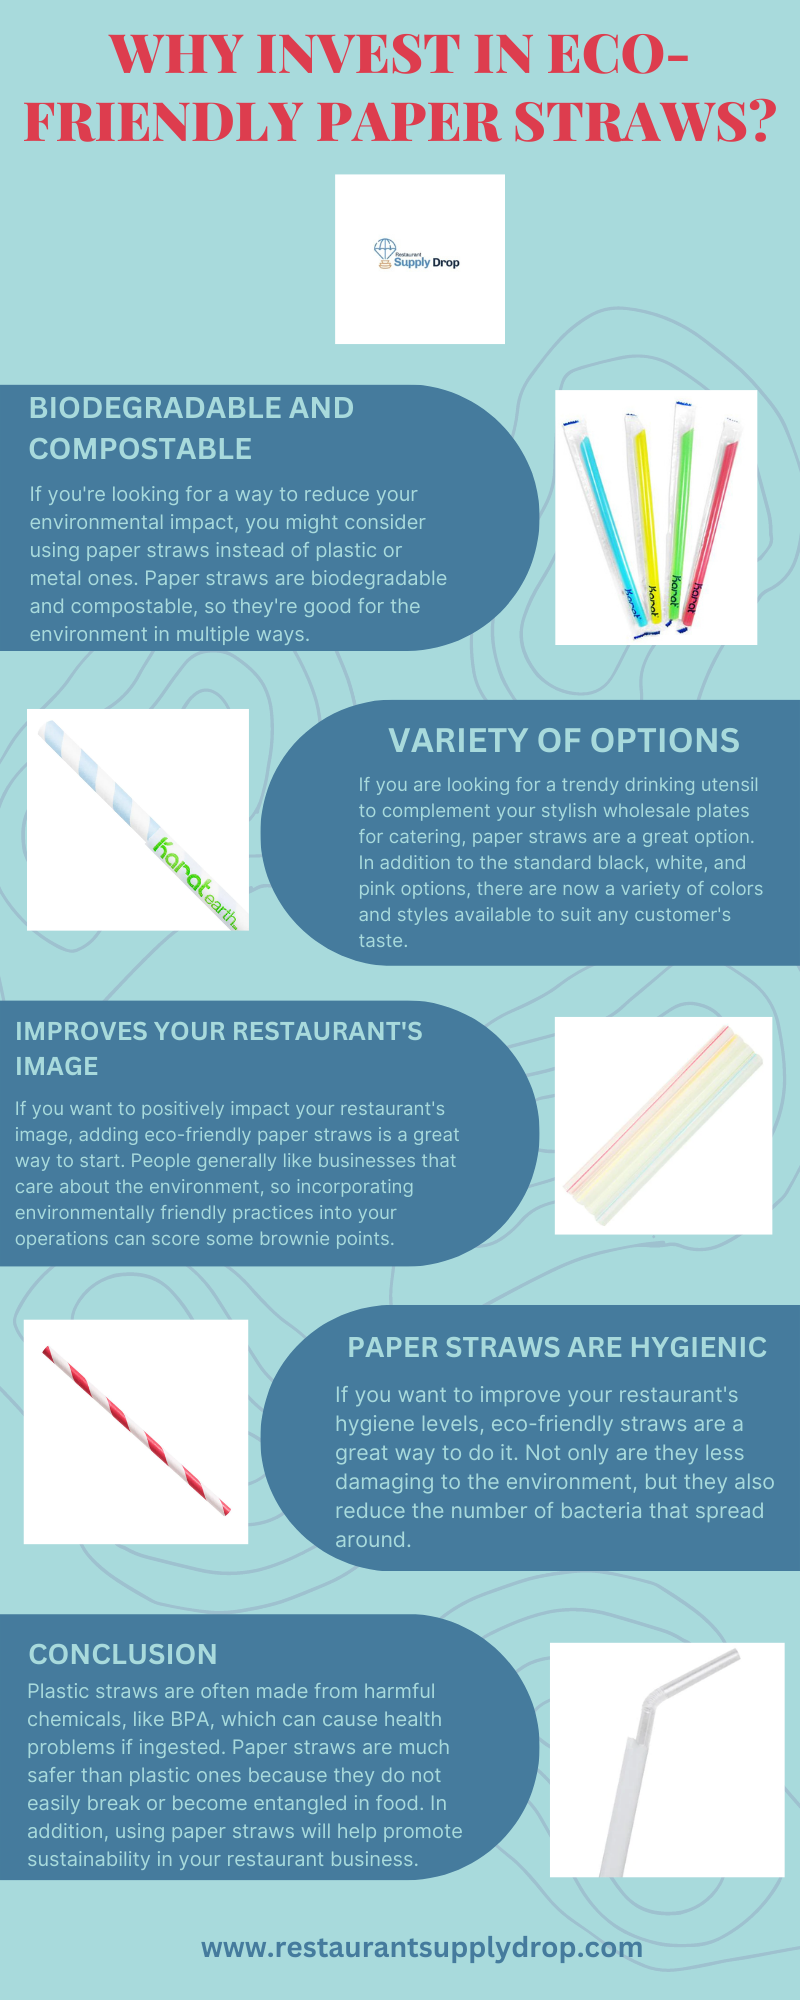 WHY INVEST IN ECO-FRIENDLY PAPER STRAWS?